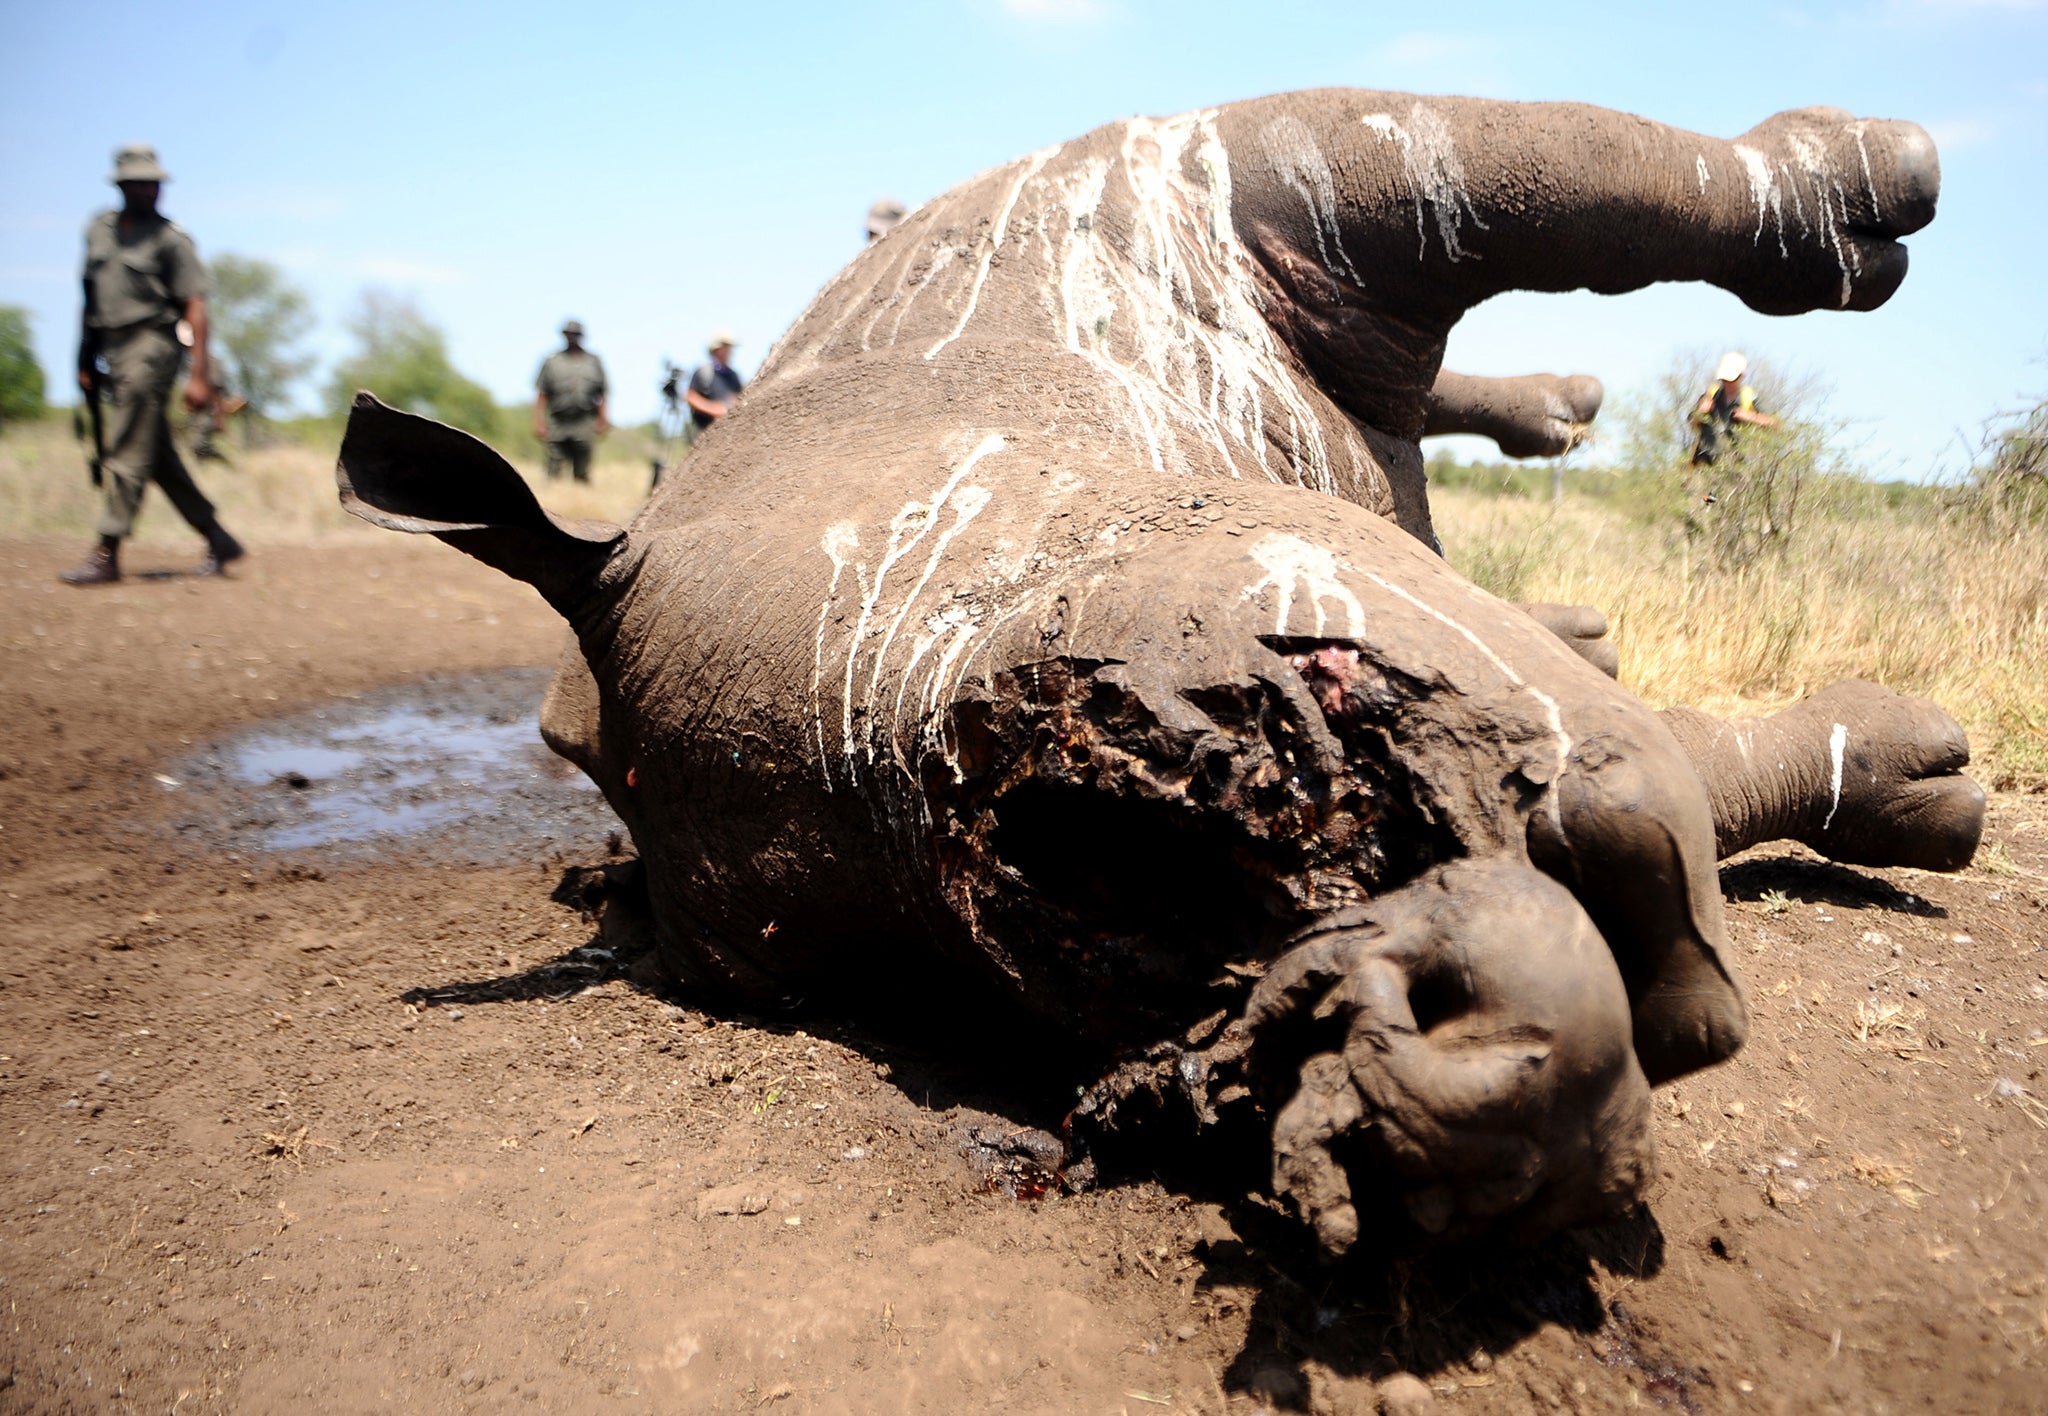 The carcass of a rhino killed by poachers in the Kruger National park